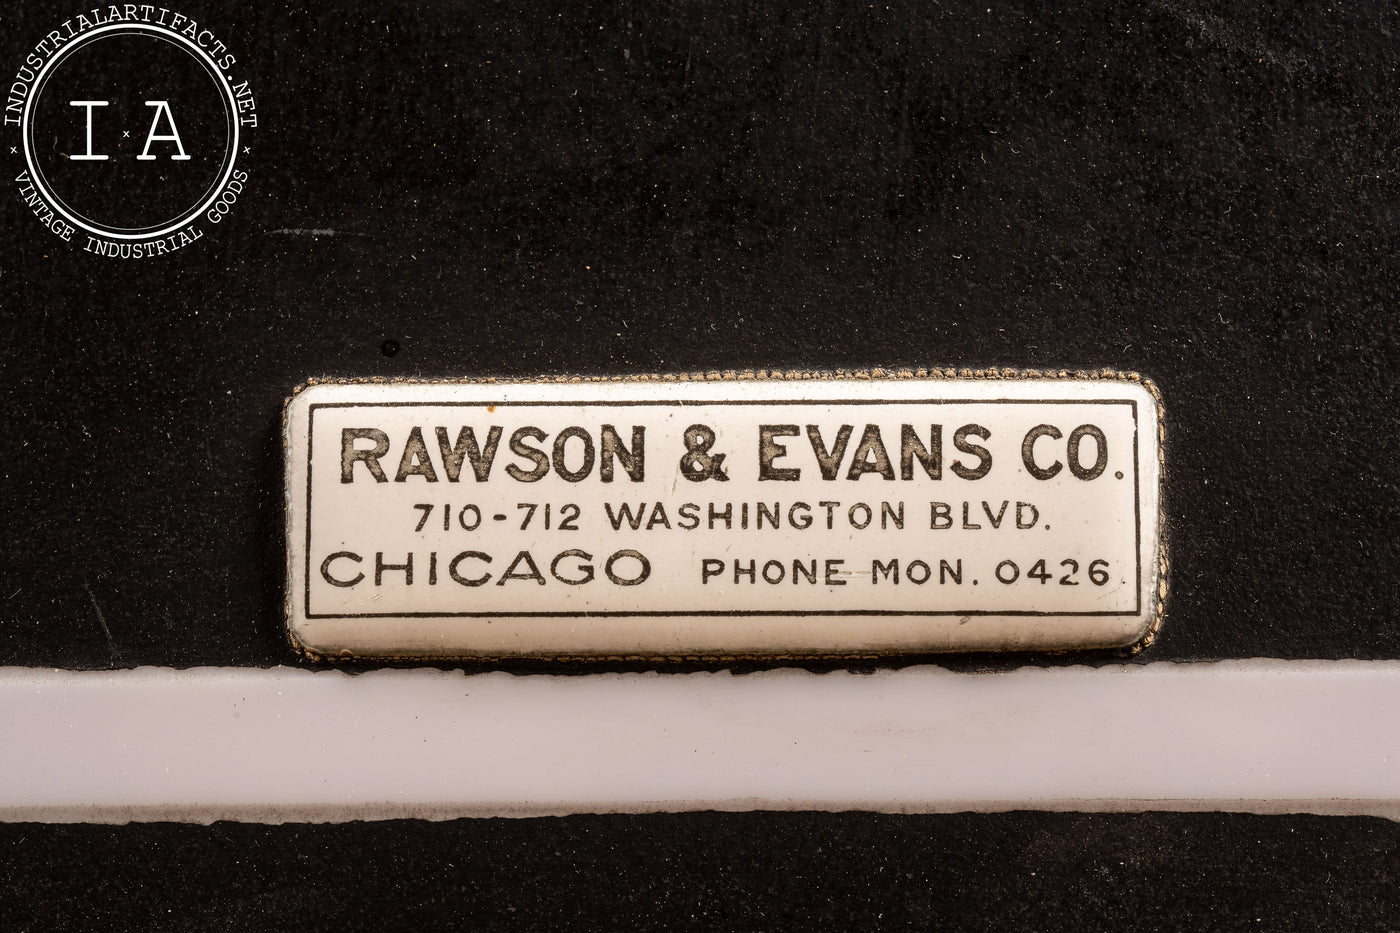 Early 20th Century Chicago Drugs Milk Glass Sign